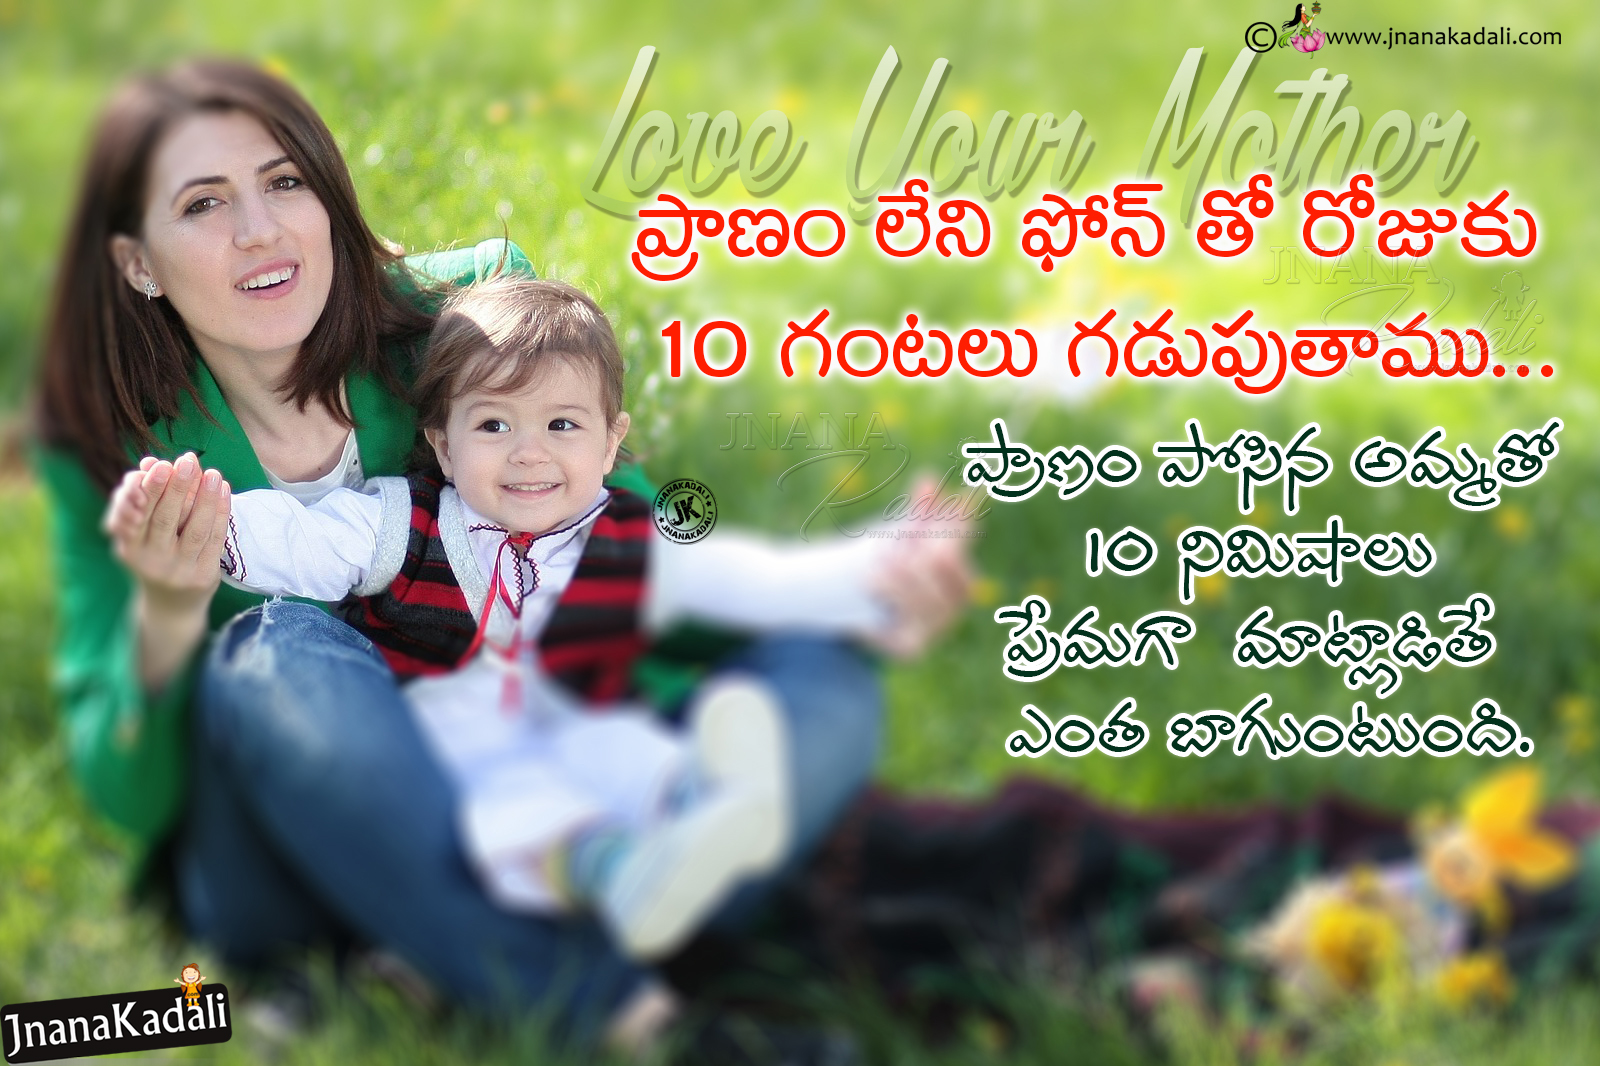 Heart Touching Mother Quotes hd wallpapers in Telugu-Amma Telugu ...